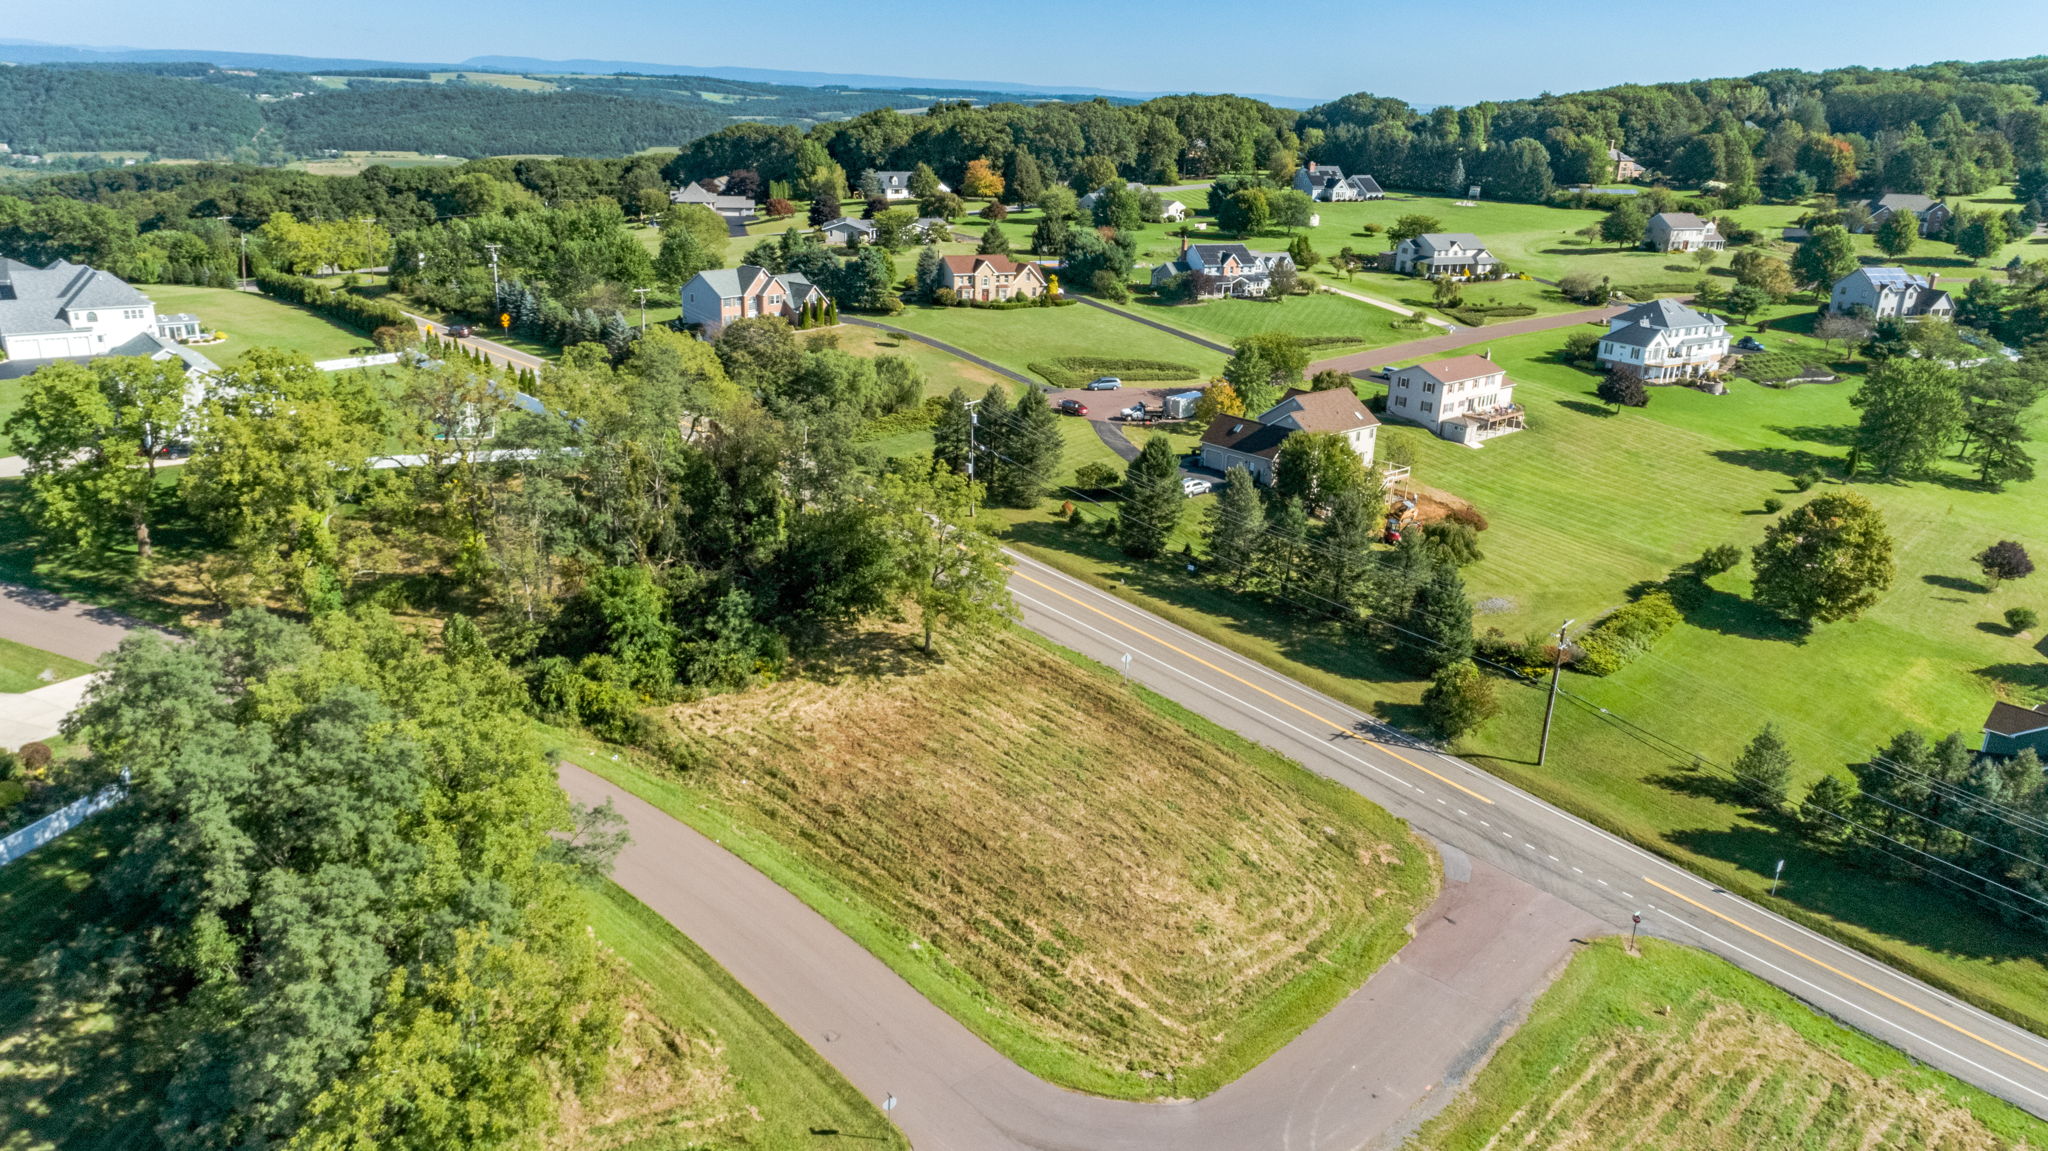 Building Lots Available in Whisper Meadows and Woods of Welsh Subdivision in Danville PA